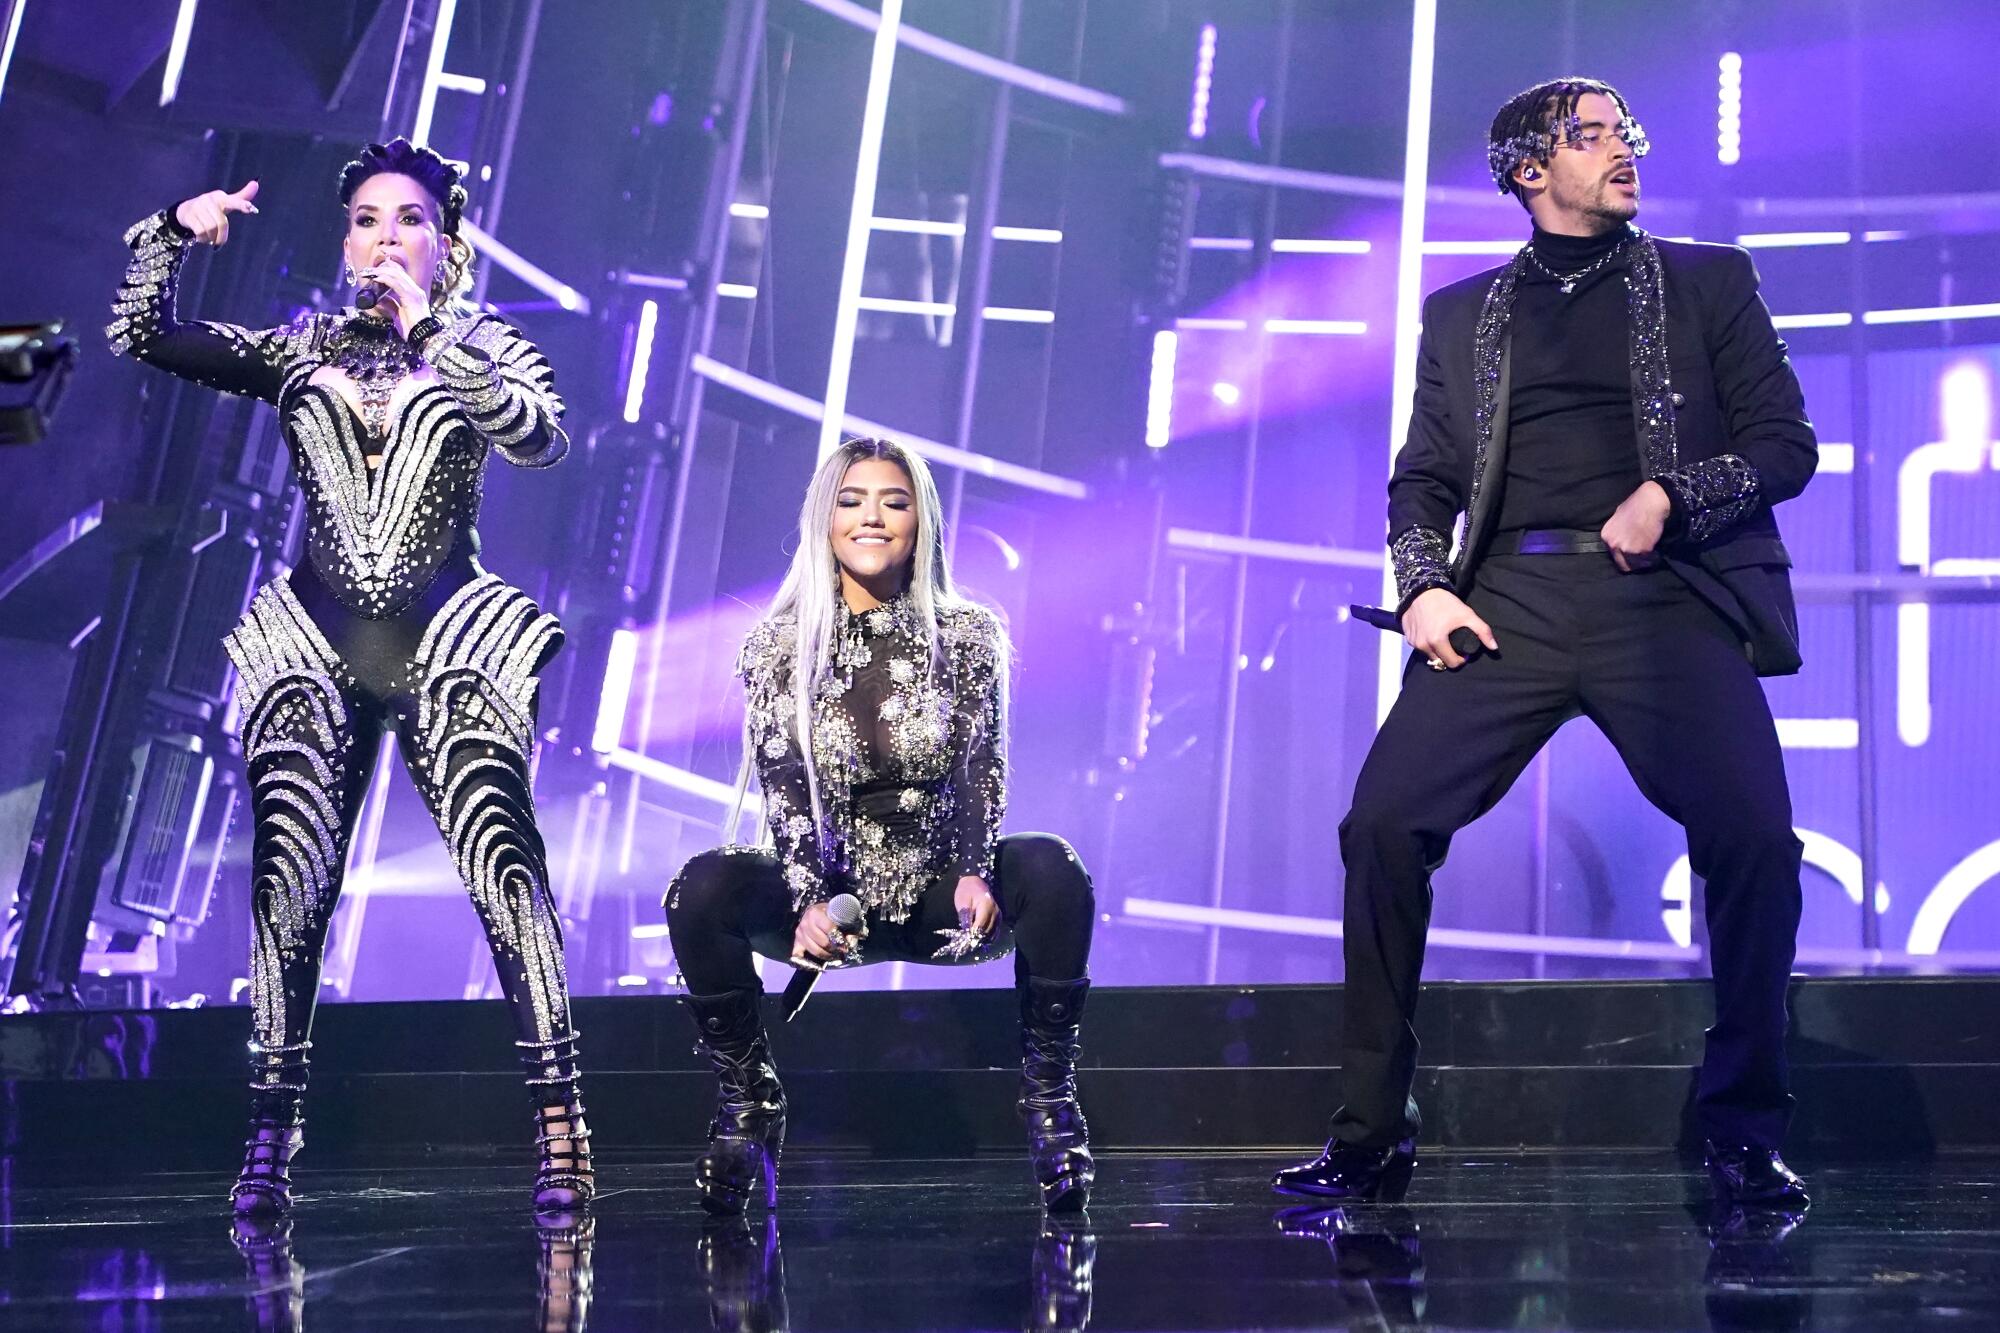 Ivy Queen, Nesi, Bad Bunny perform on a brightly lighted stage.